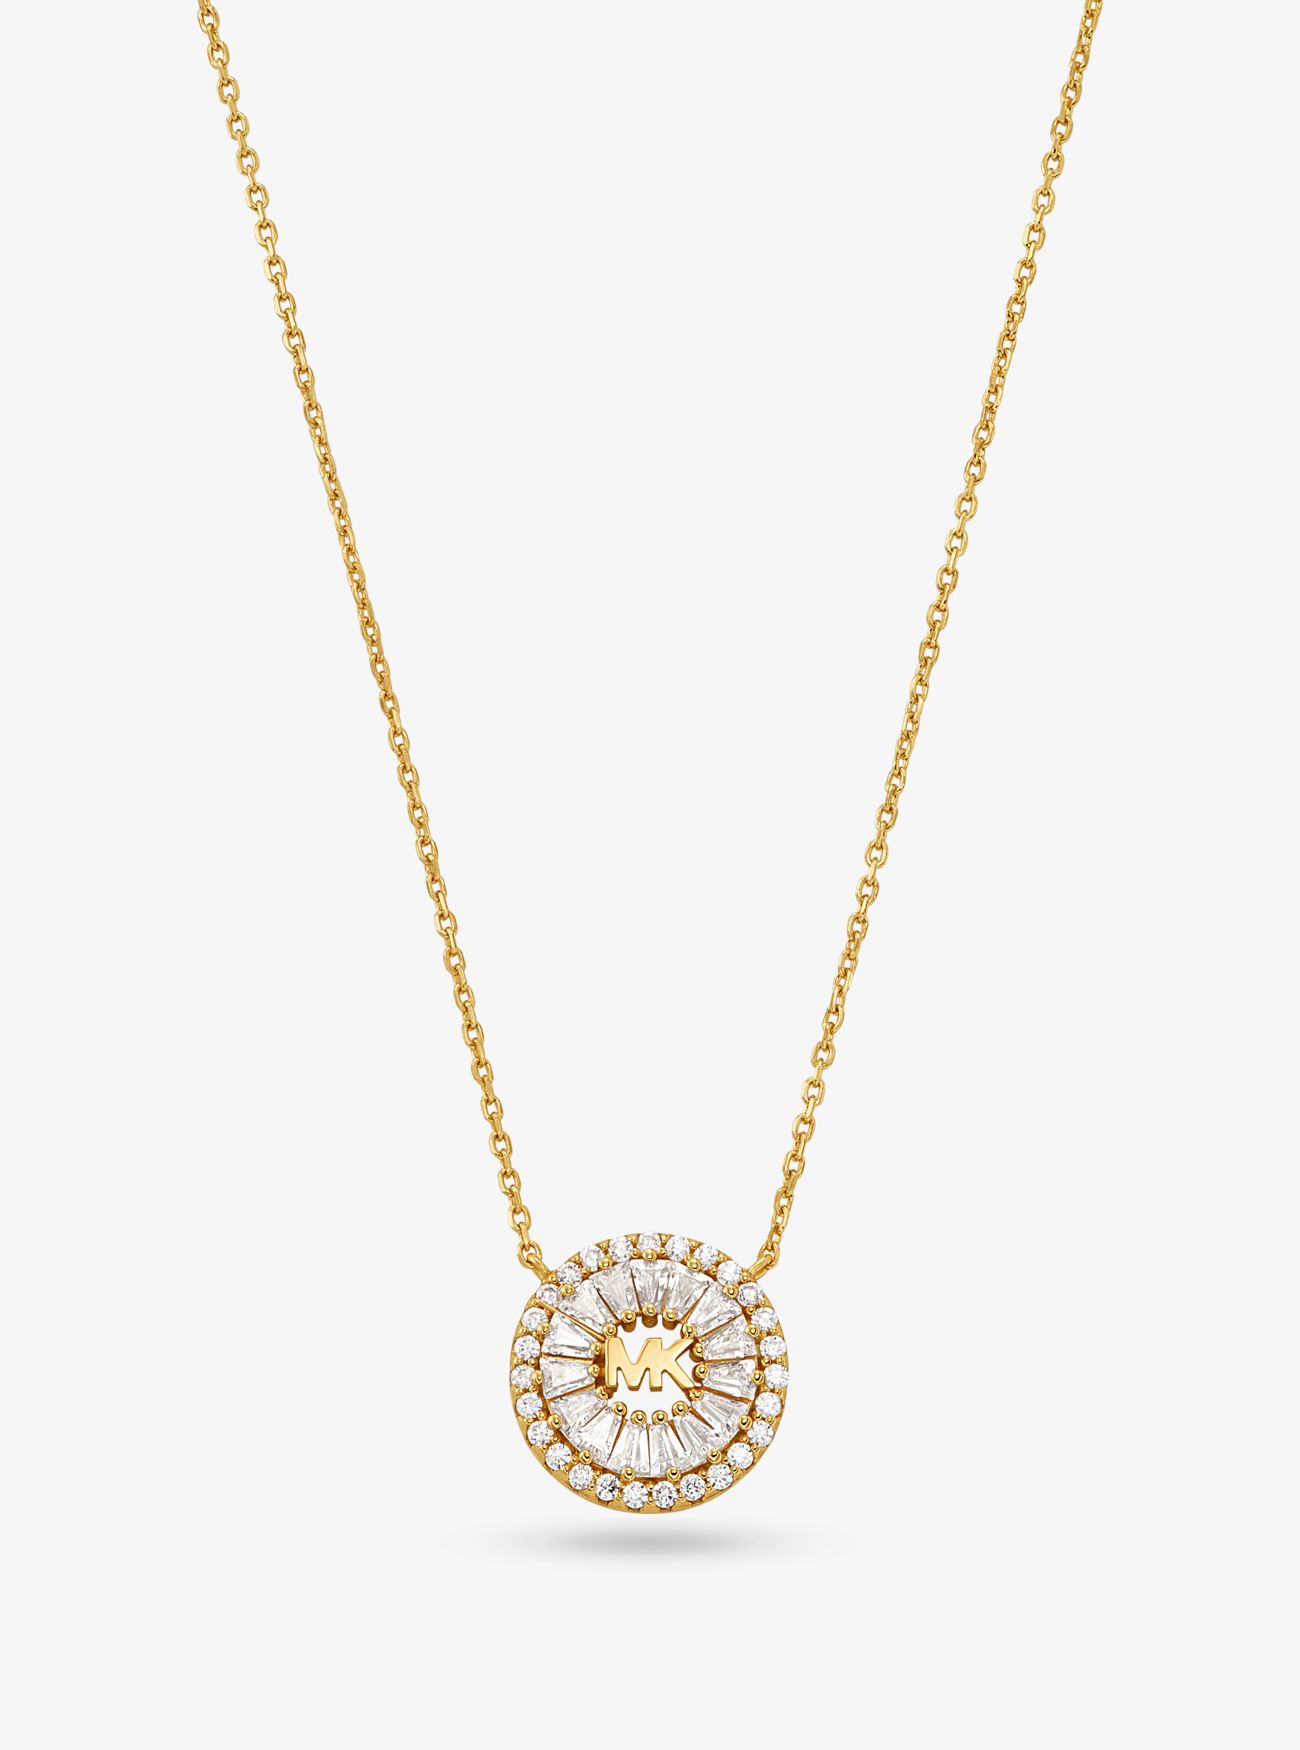 MK Precious Metal-Plated Sterling Silver Pavé Halo Necklace - Gold - Michael Kors